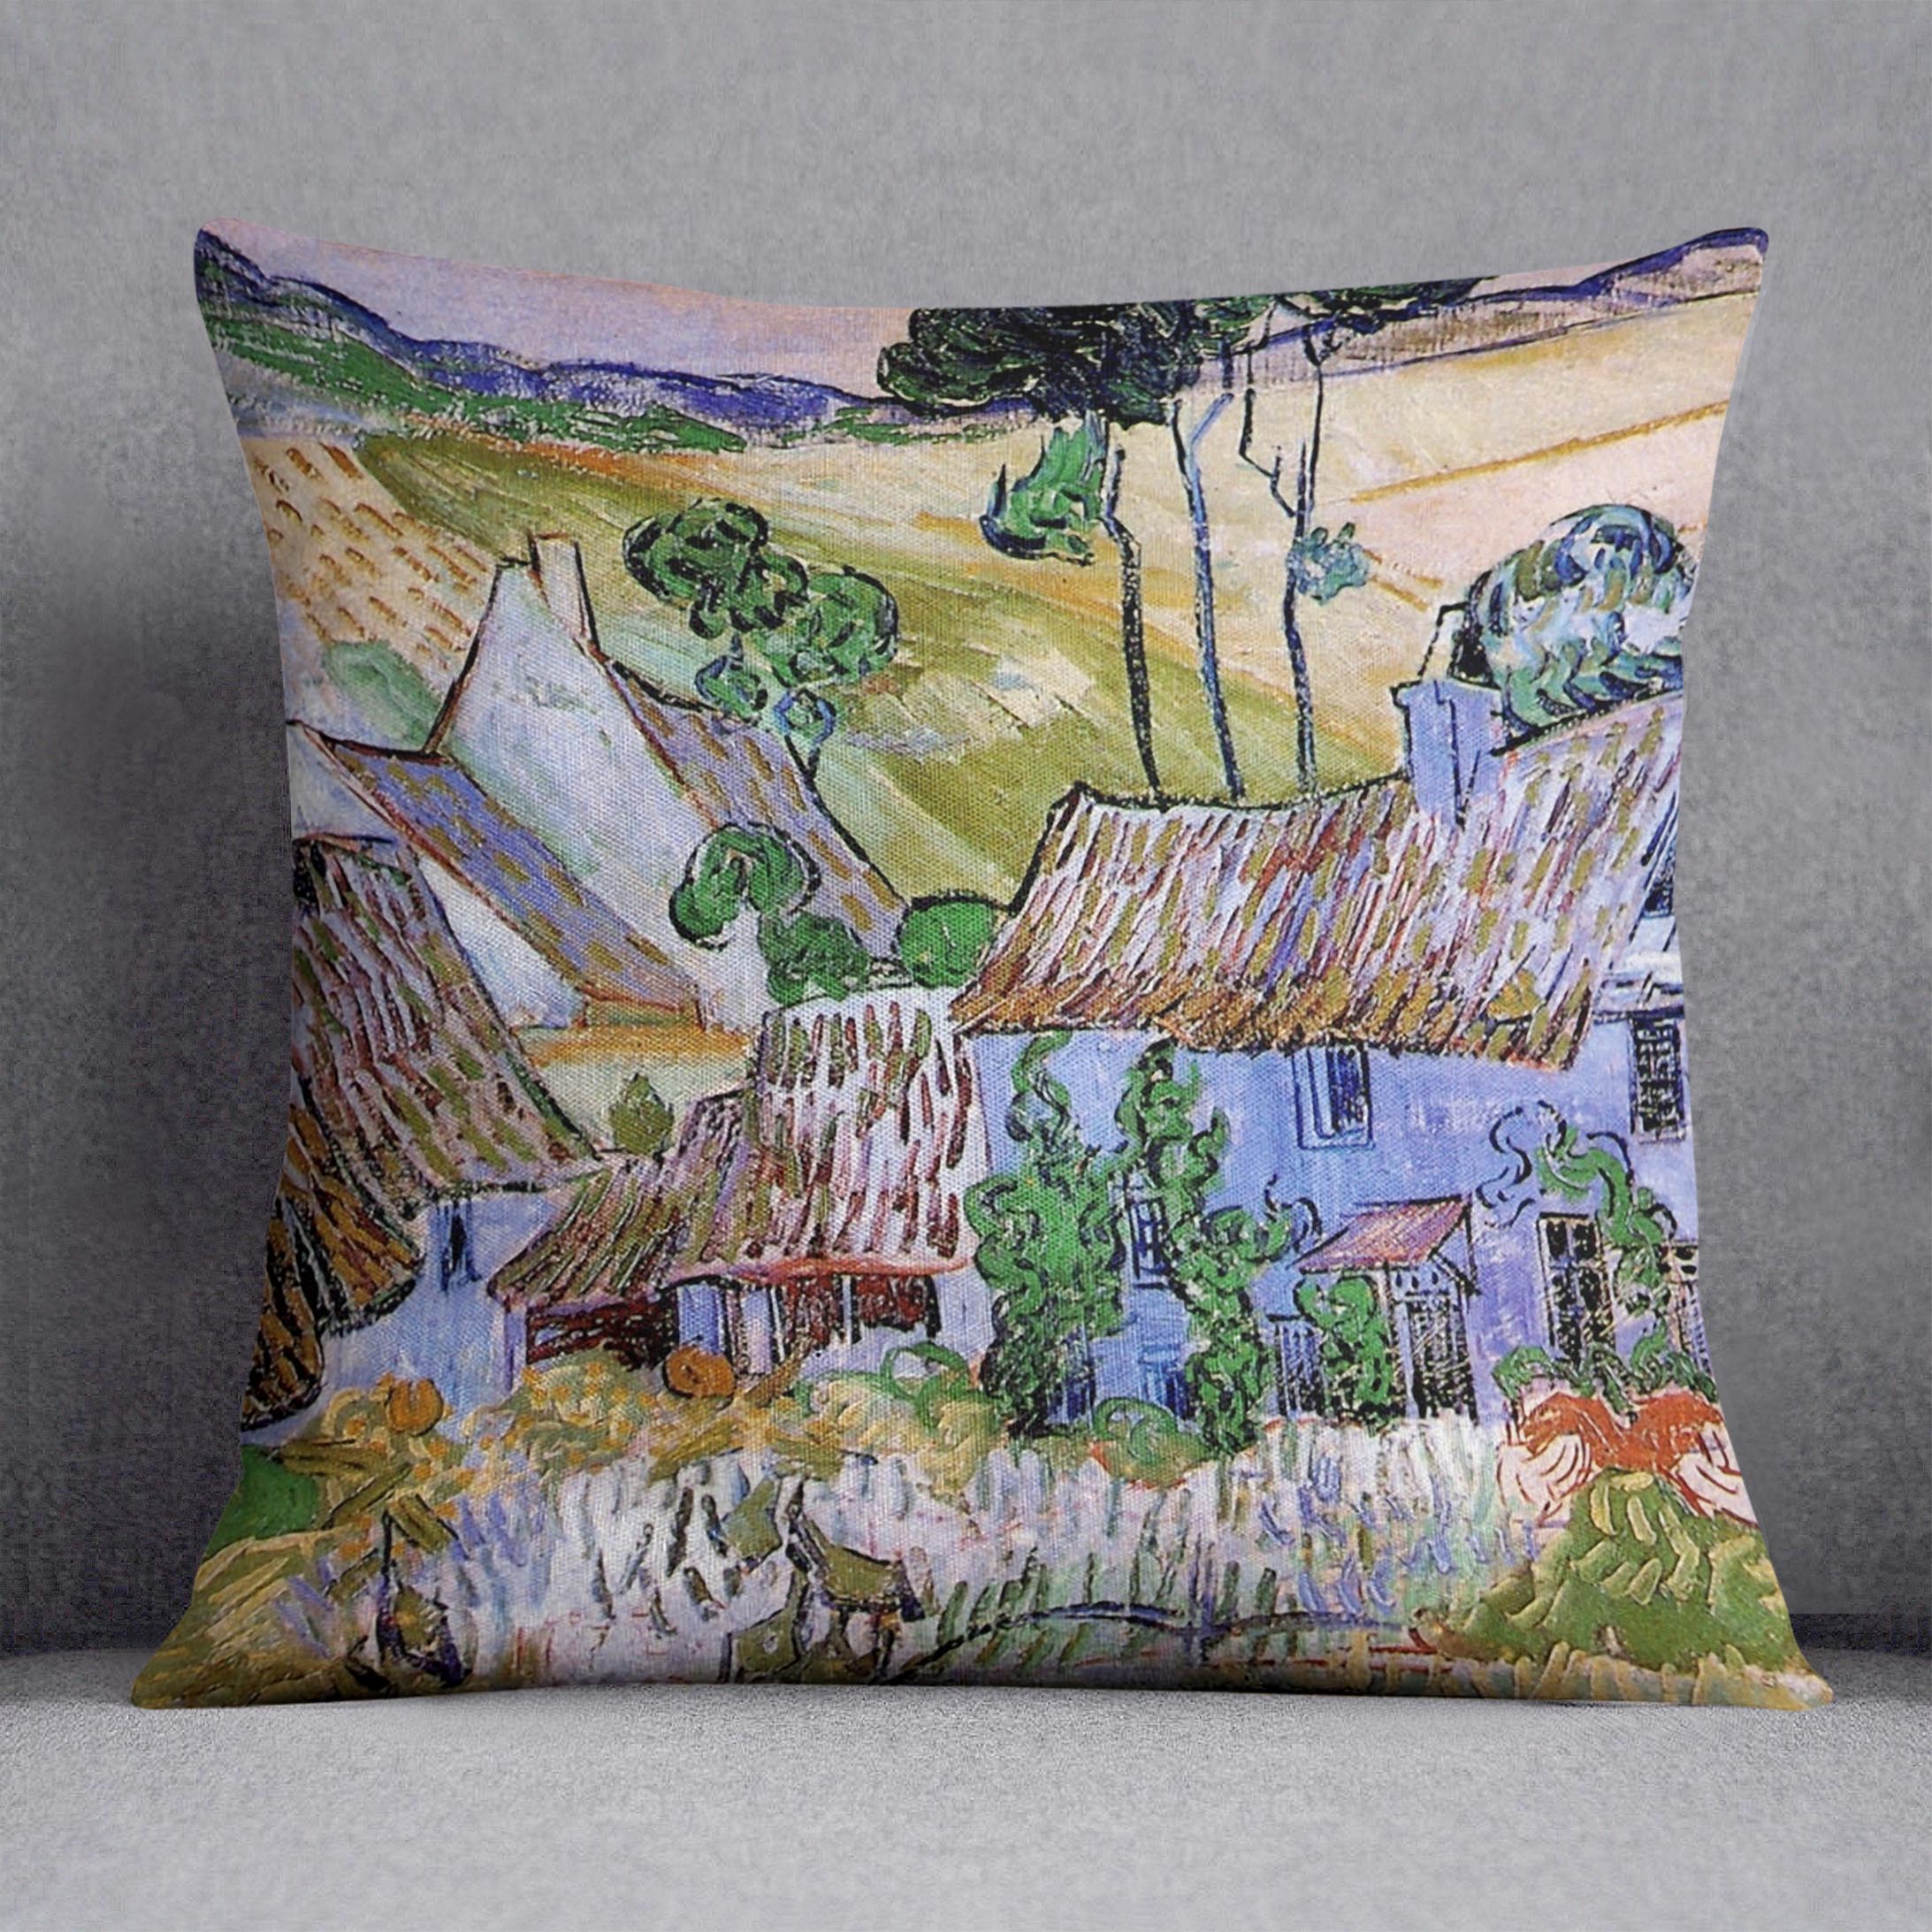 Thatched Cottages by a Hill by Van Gogh Cushion